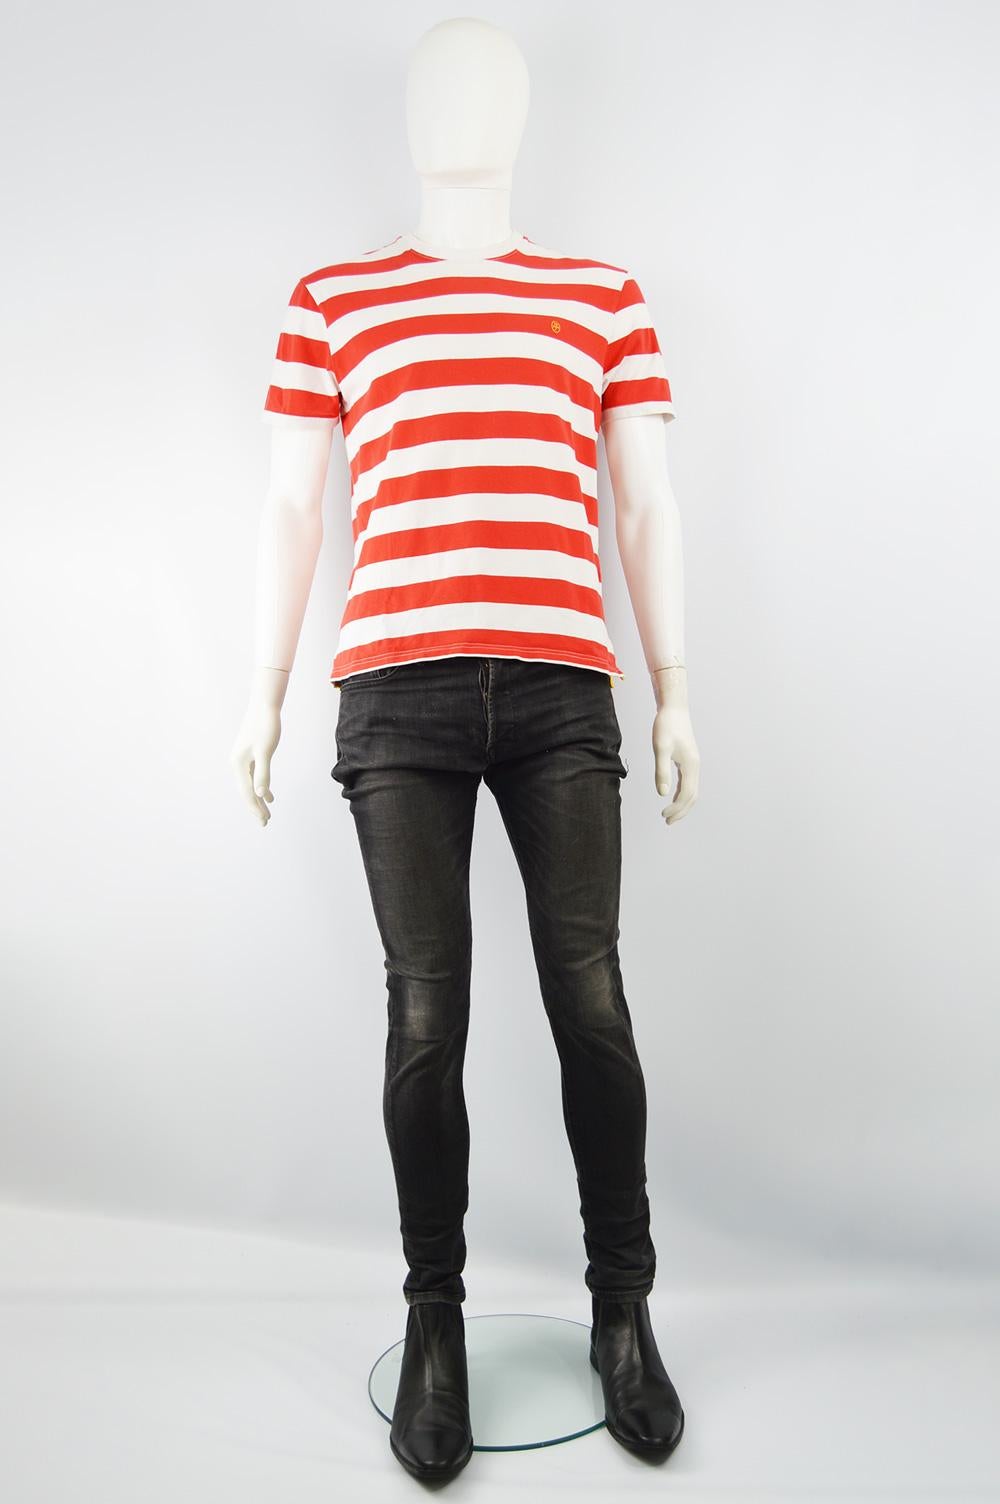 Size: Marked M
Chest - 40” / 101cm
Waist - 38” / 96cm
Length (Shoulder to Hem) - 24” / 61cm
Shoulder to Shoulder - 17” / 43cm
An amazing vintage tshirt by iconic French fashion designer, JC de Castelbajac. In a white and red nautical striped stretch